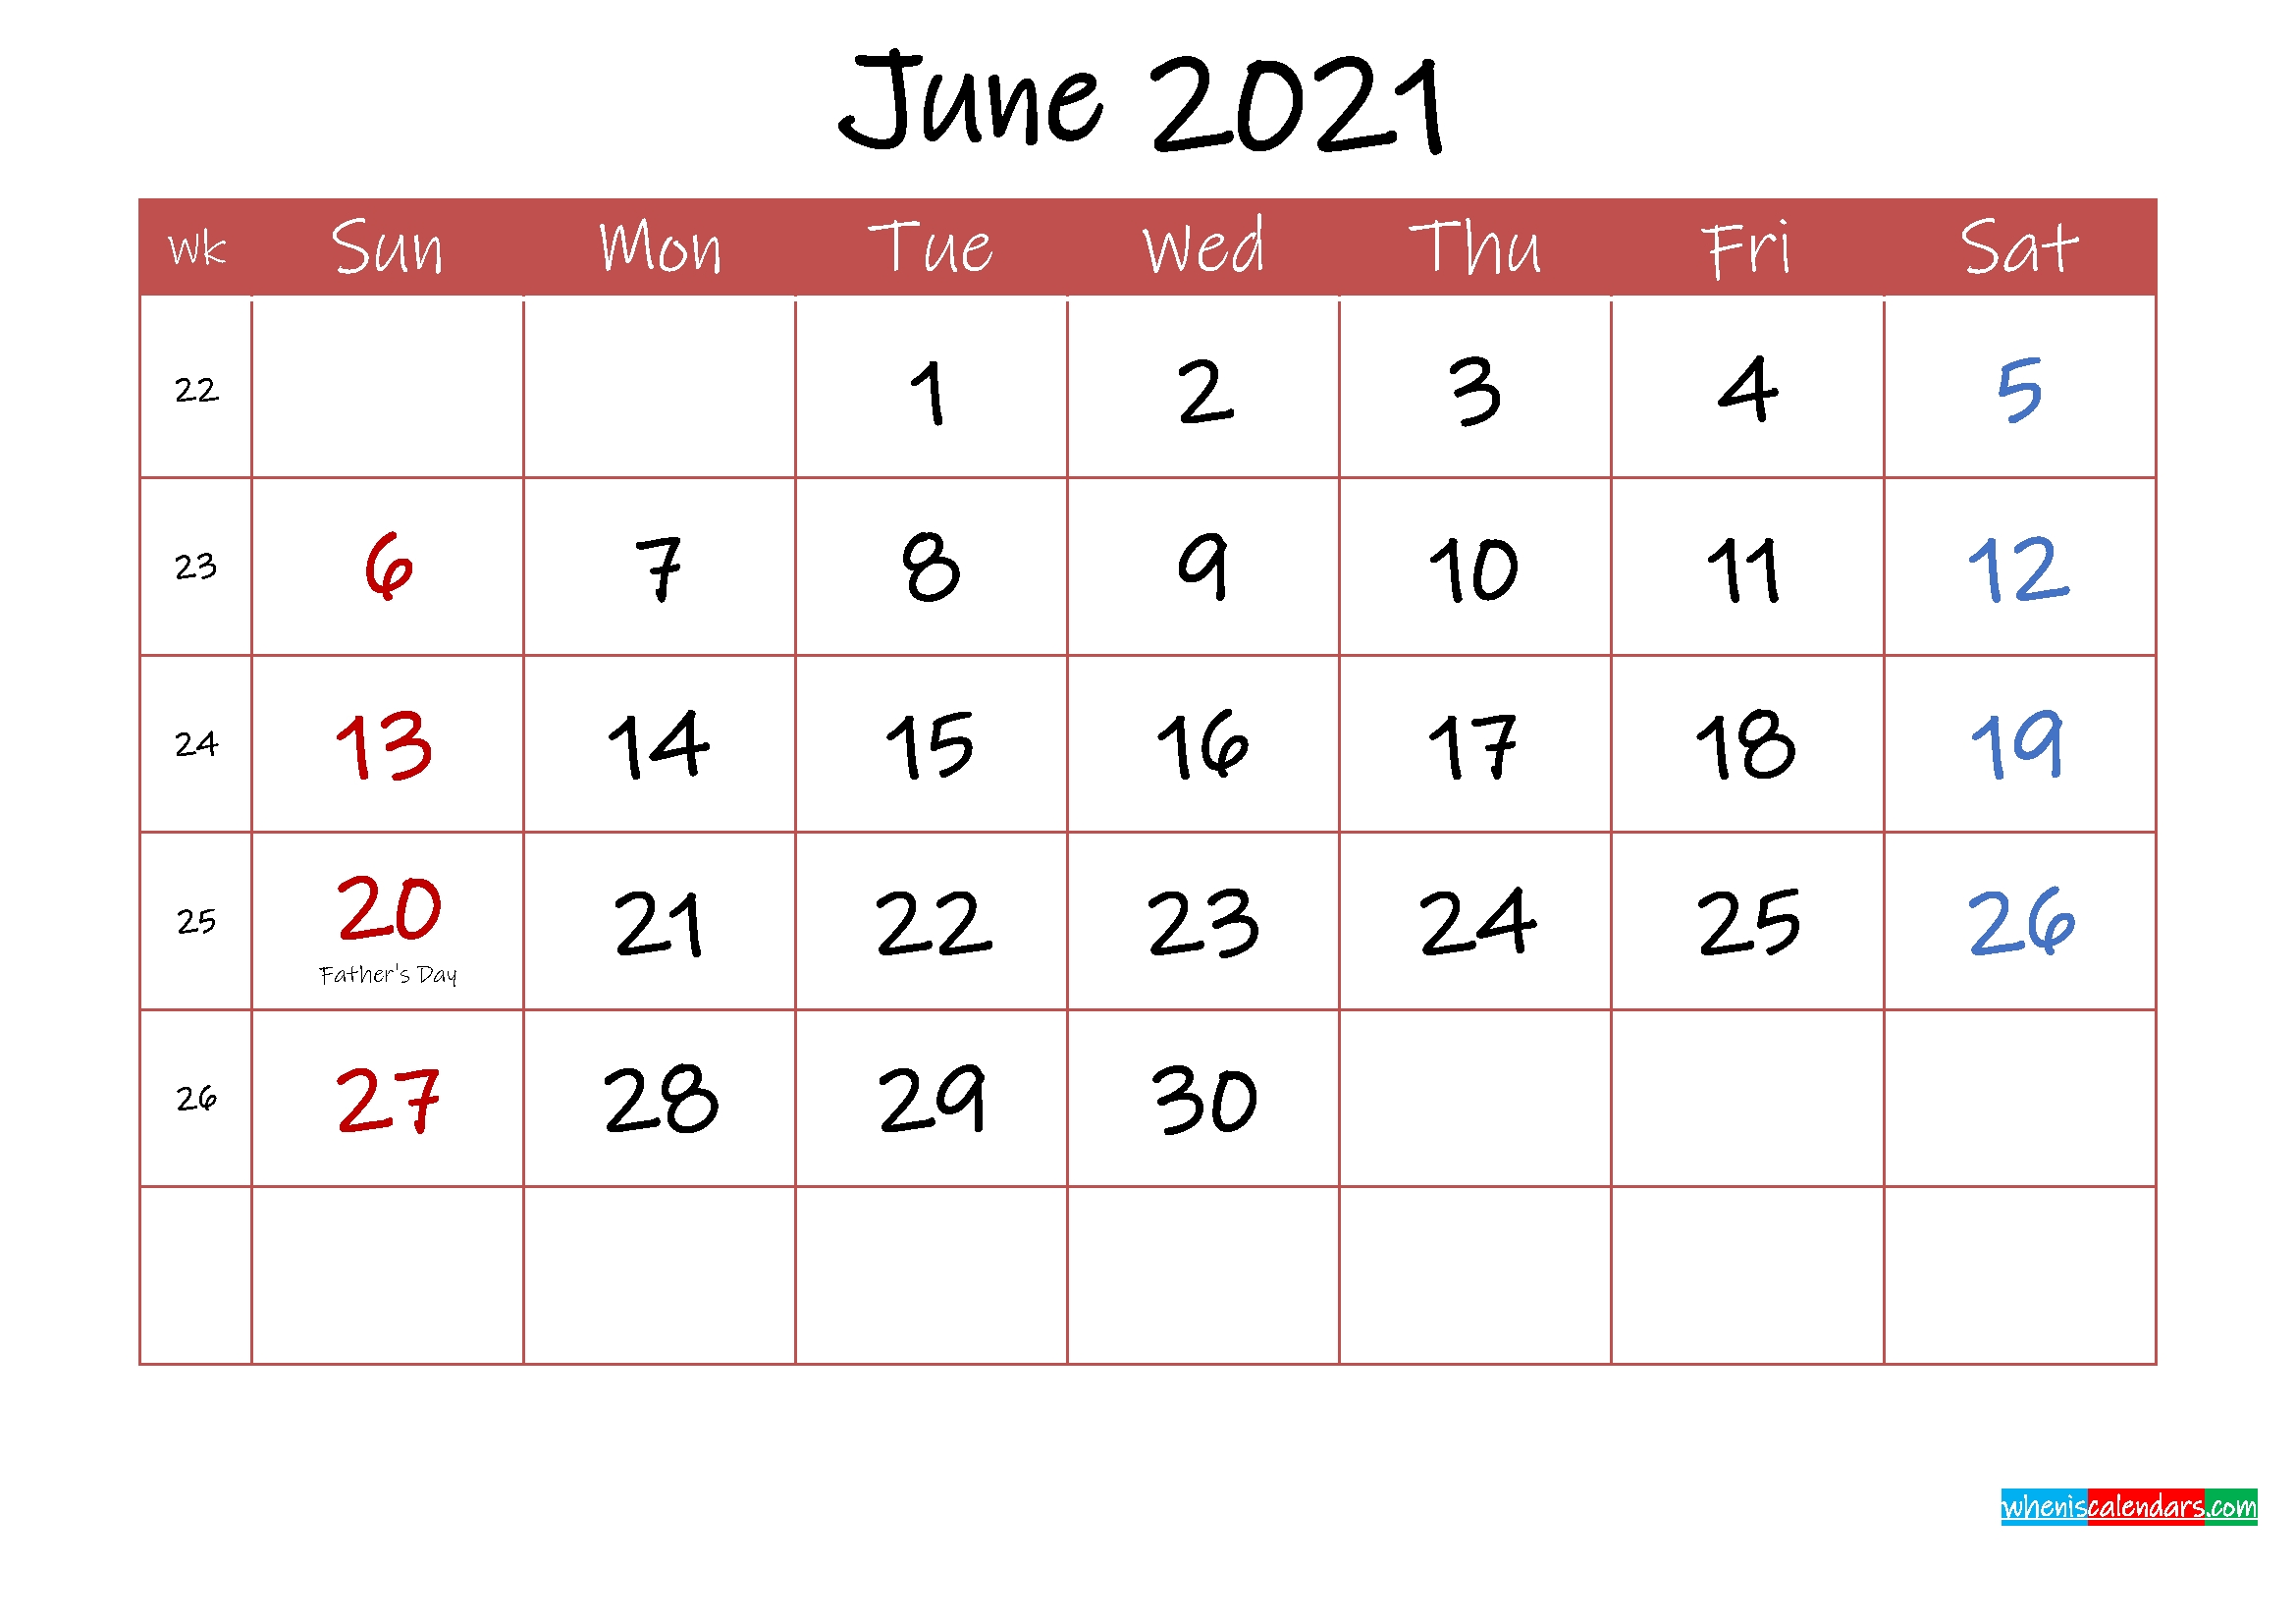 Printable June 2021 Calendar With Holidays - Template Ink21M30-June 2021 Calendar Printable